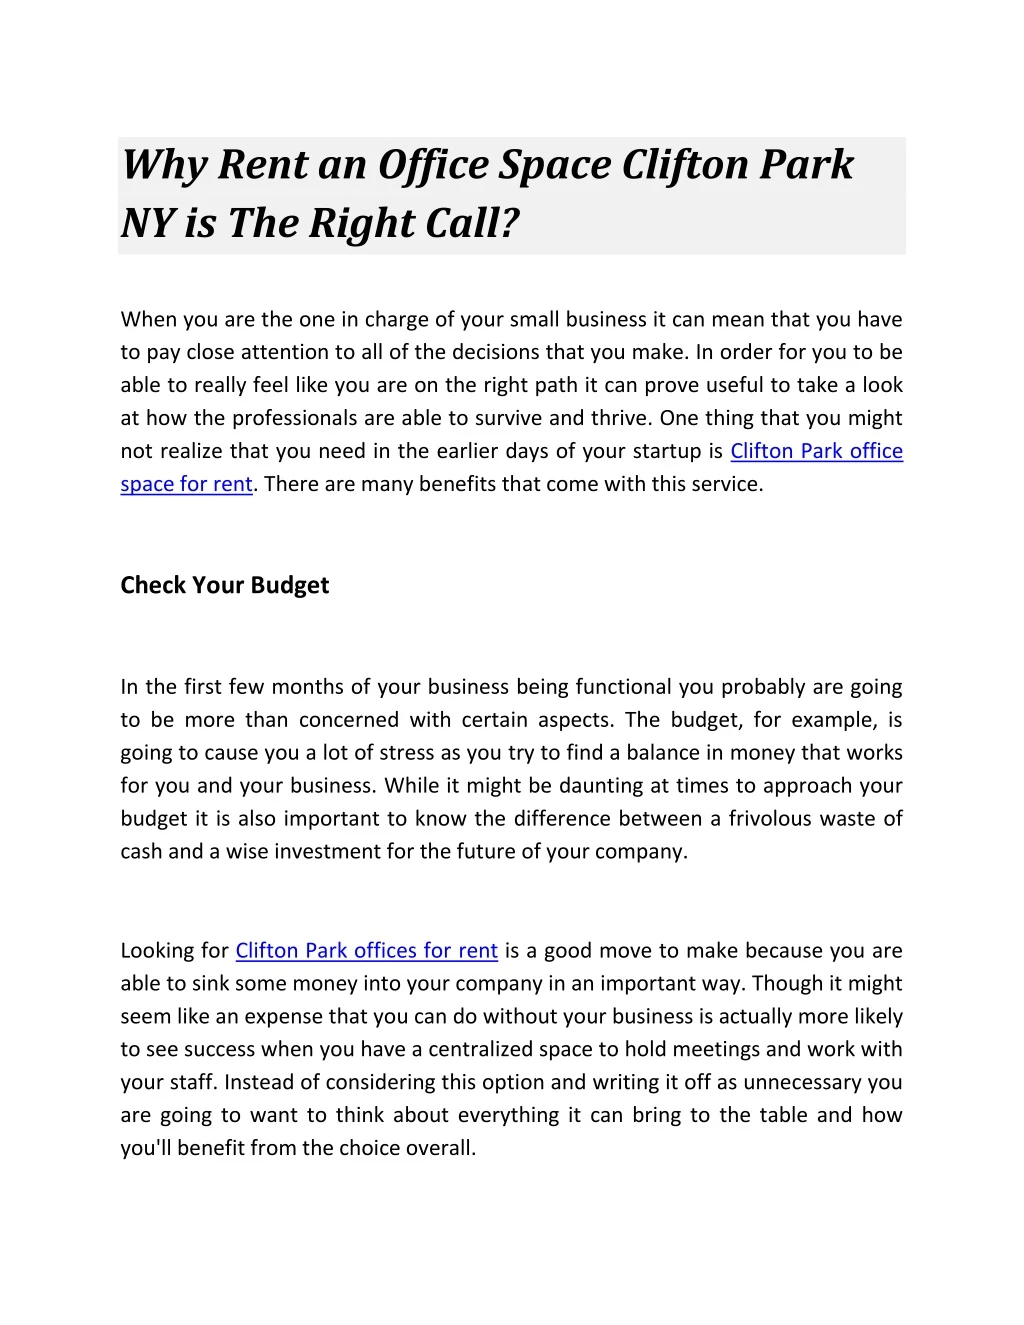 why rent an office space clifton park